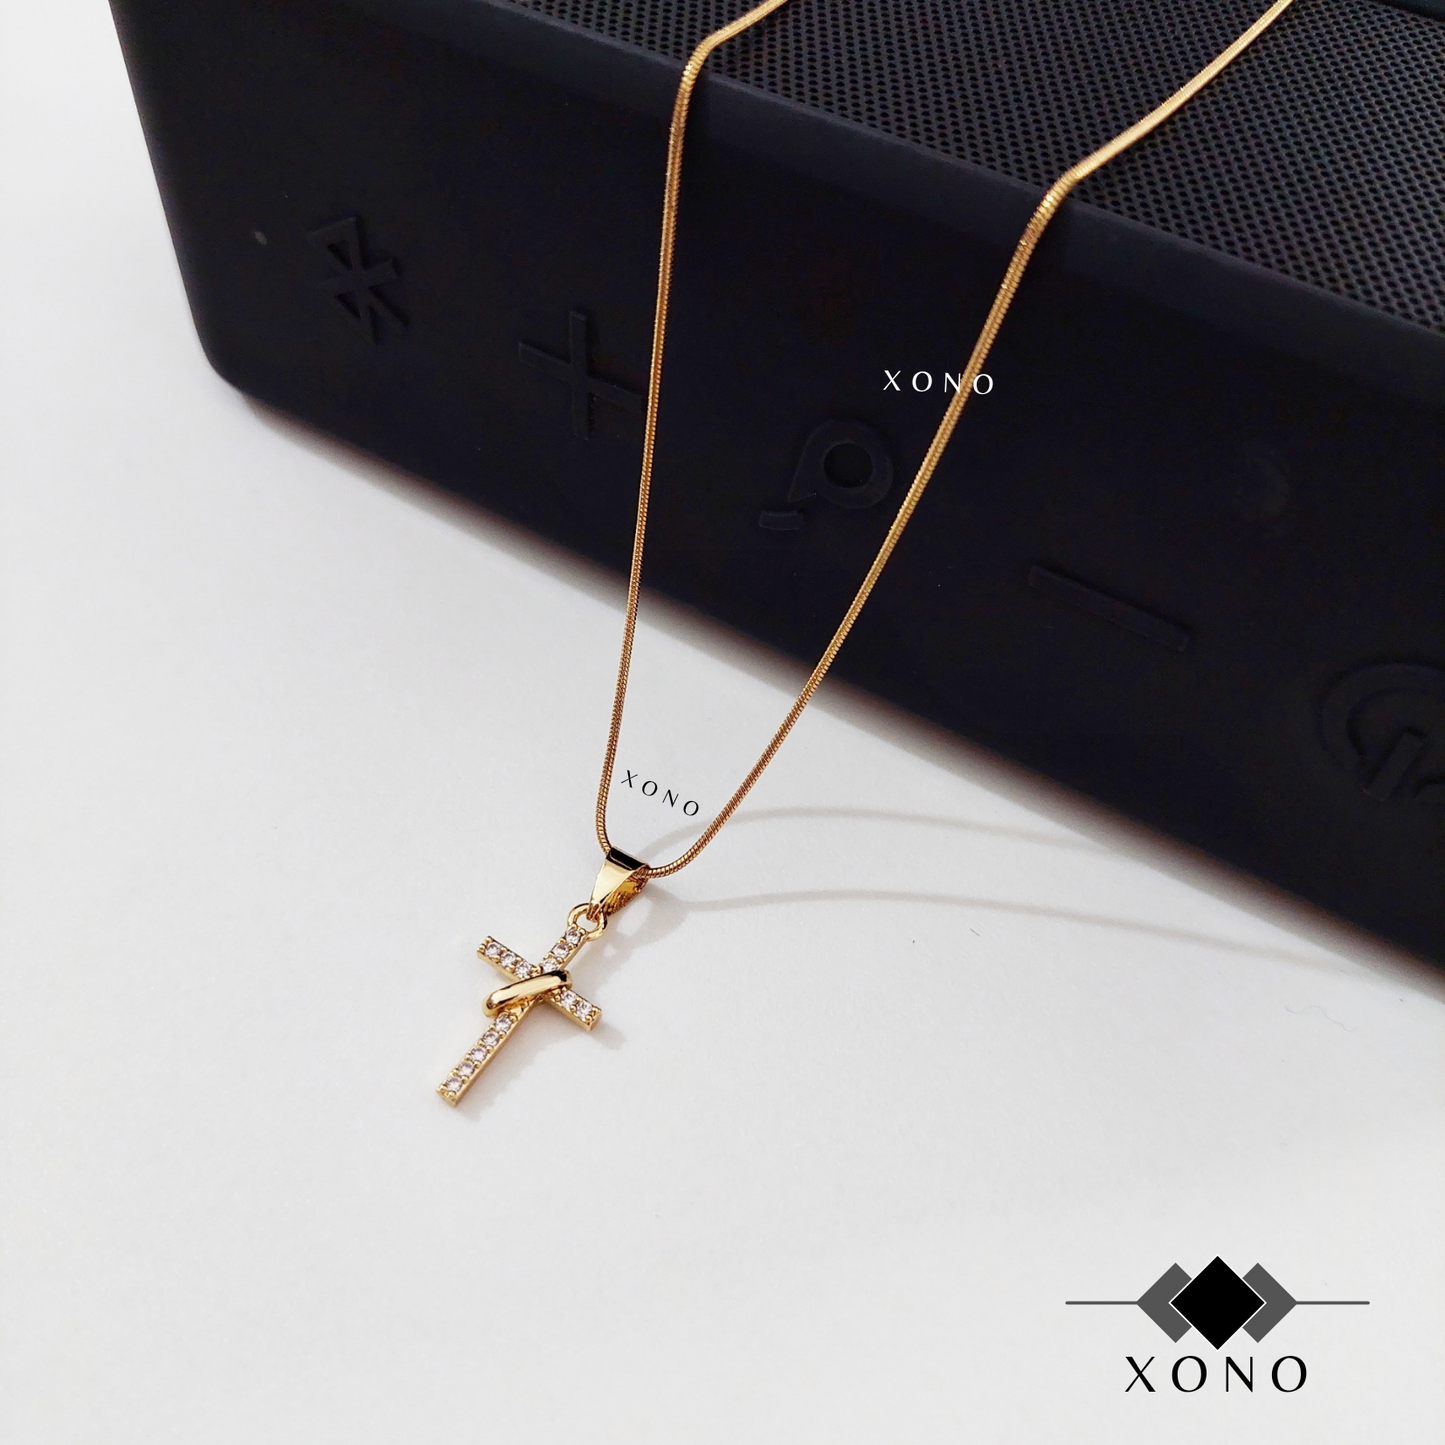 Small Eternity Iced Cross Necklace